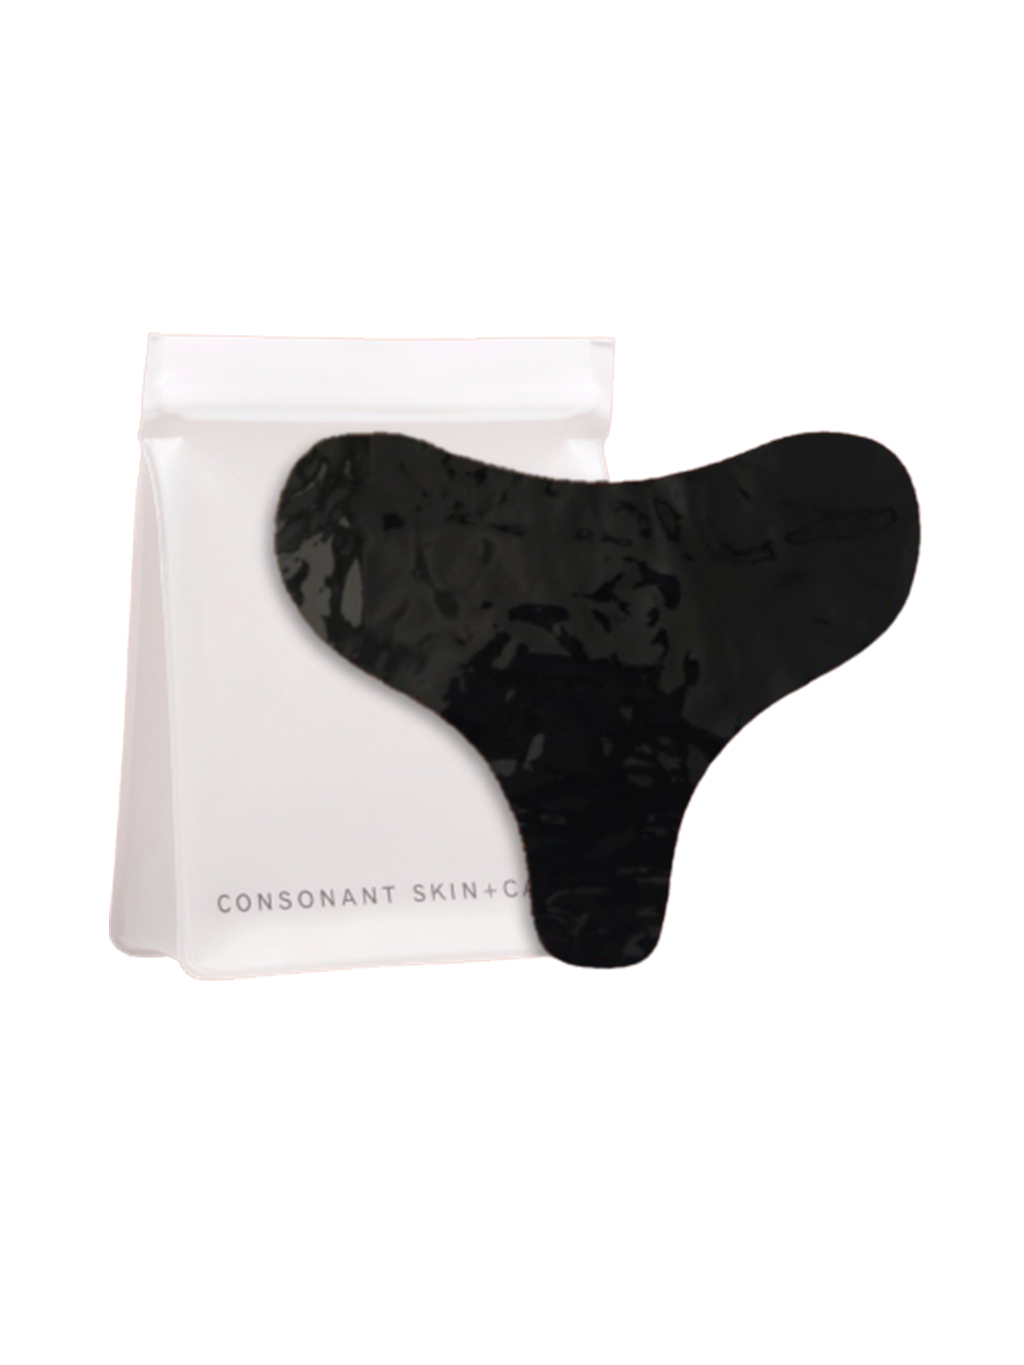 Consonant Skin+Care Reusable Silicone Chest Mask